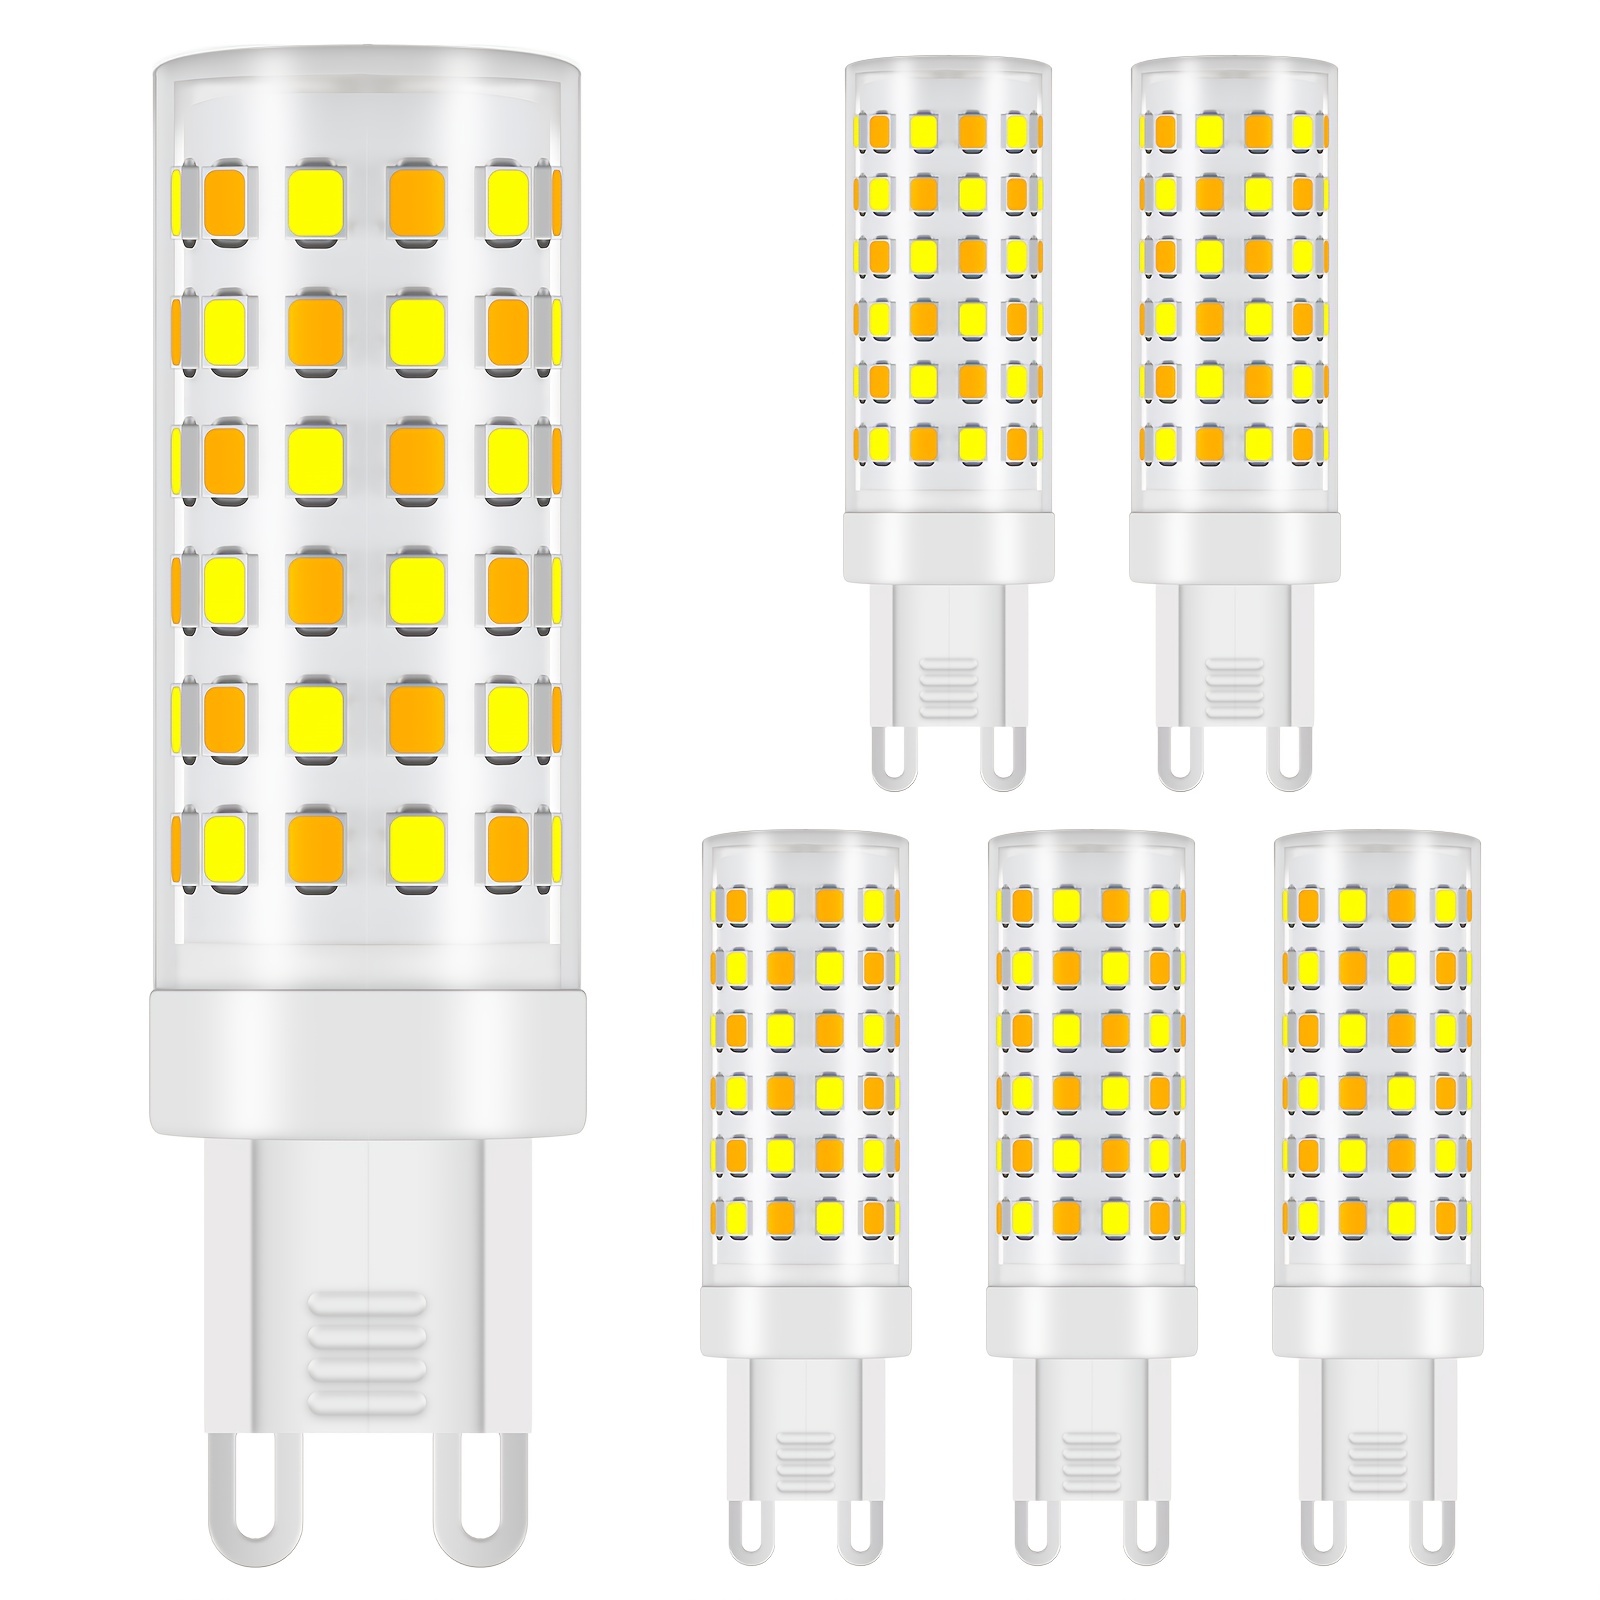 10PCS/LOT LED G4 mini bulb AC/DC 12V 1W 2W 3W 3000K/4000K/6000K flicker  free flicker suitable for crystal lamp chandeliers